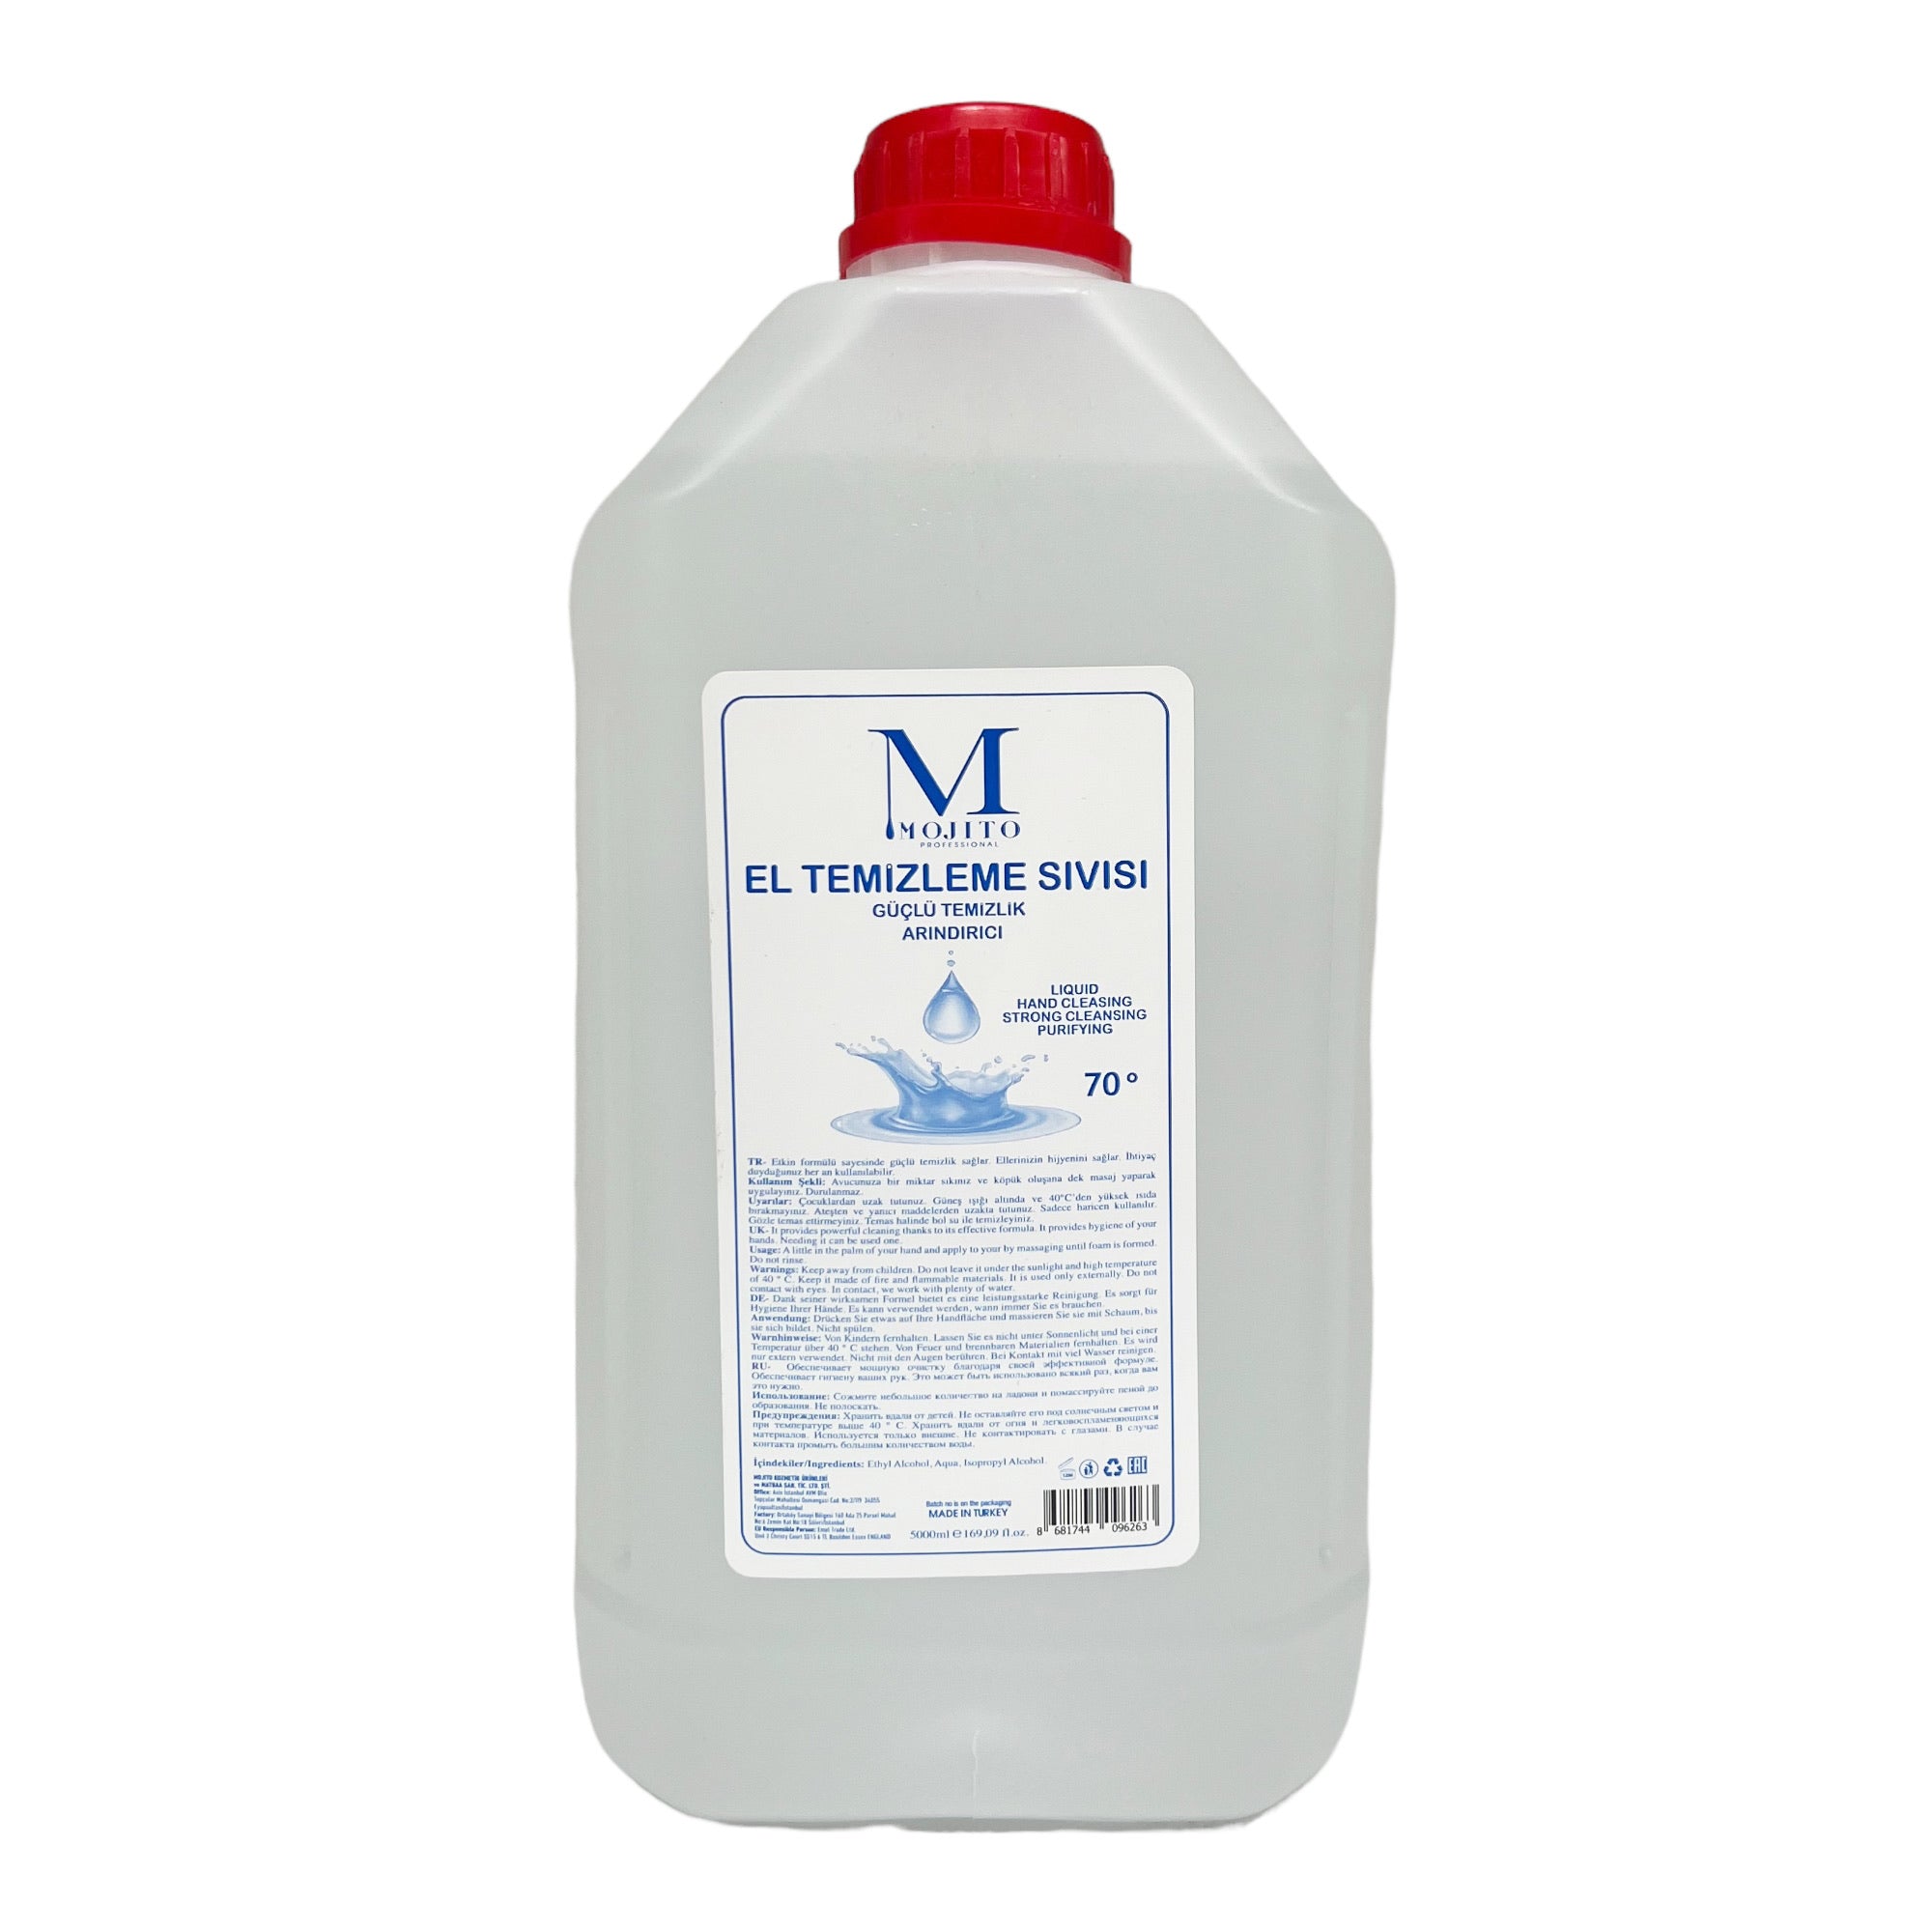 Mojito - Hand Cleansing Gel 70% Alcohol 5000ml